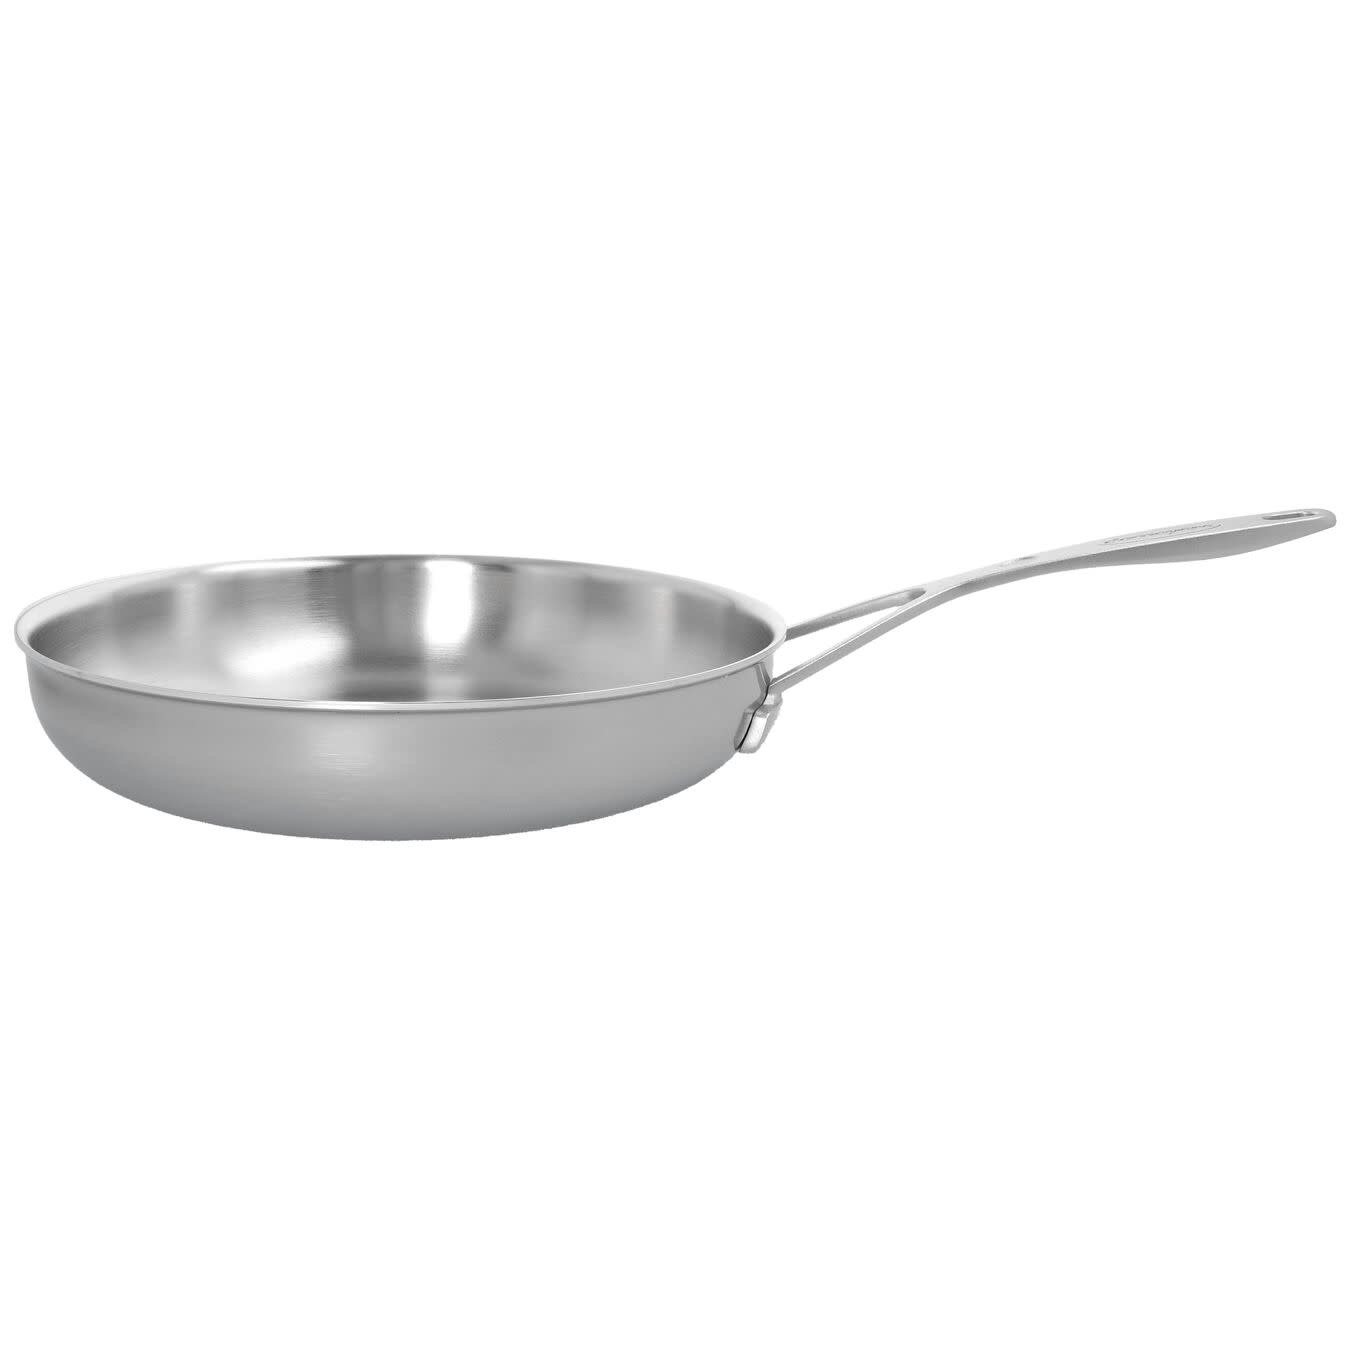 Industry 5-Ply 11-inch Stainless Steel Fry Pan - Creative Kitchen